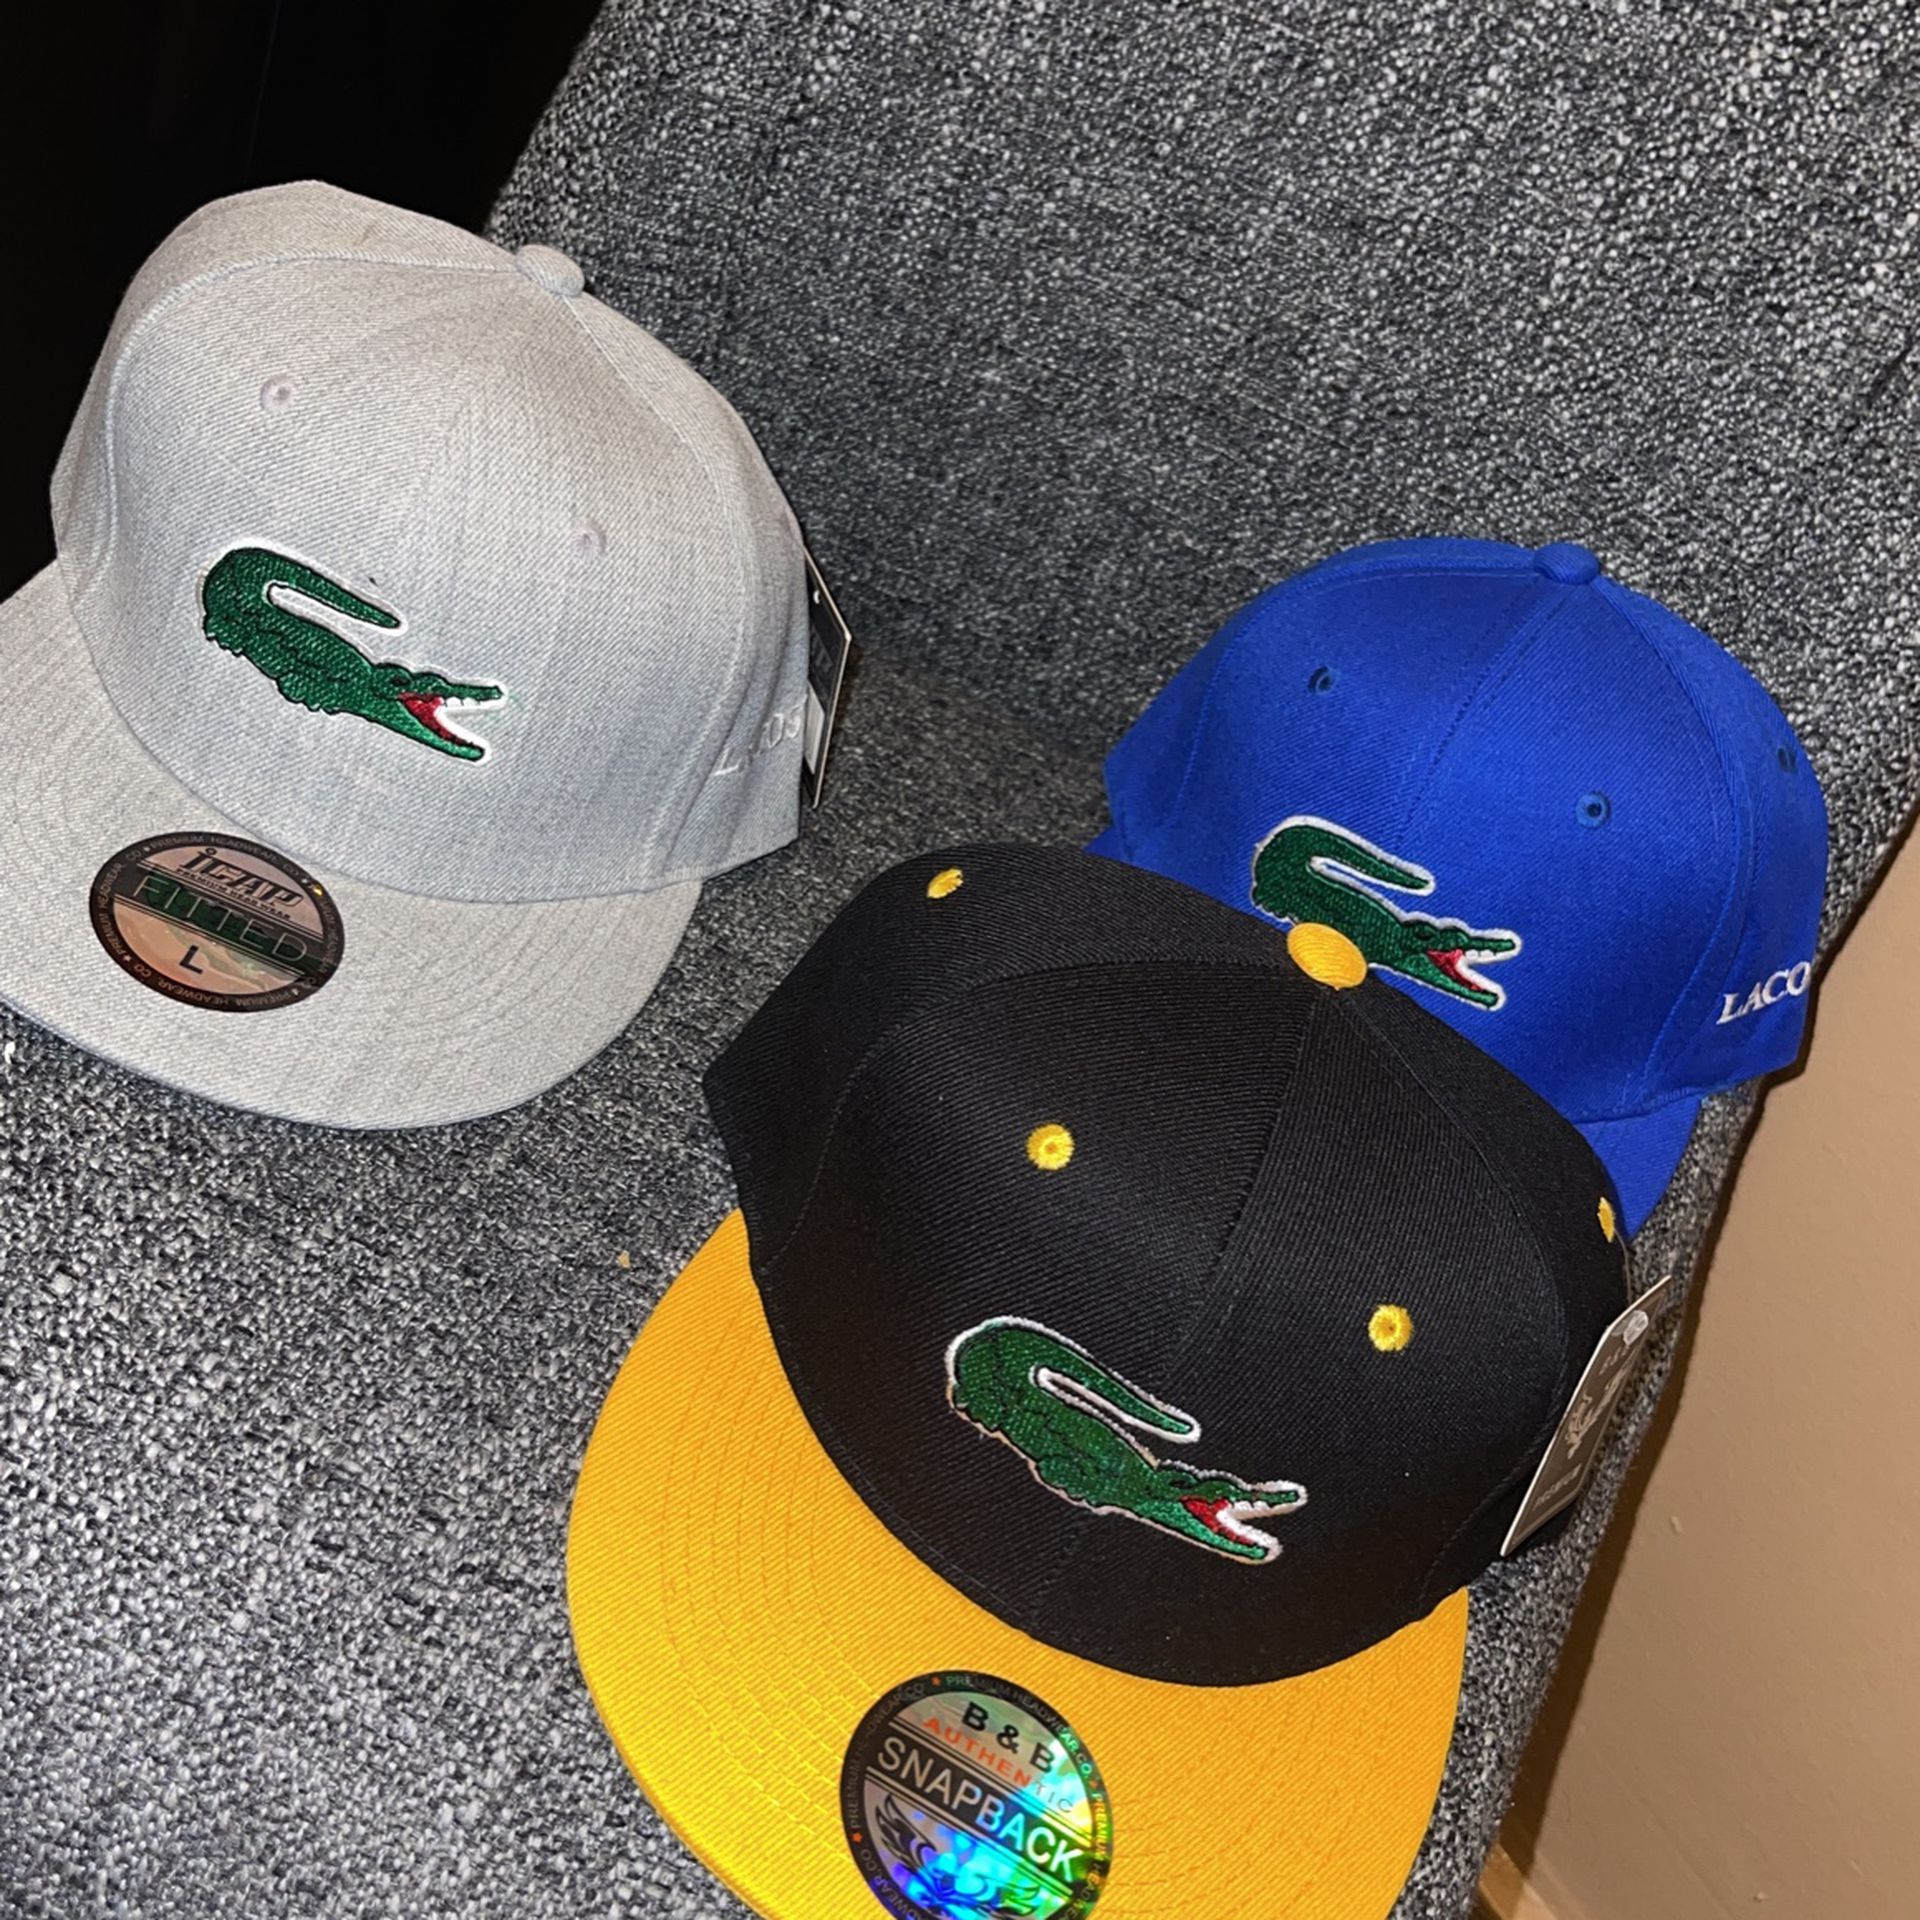 Lacoste Hats for Sale in The Bronx, - OfferUp